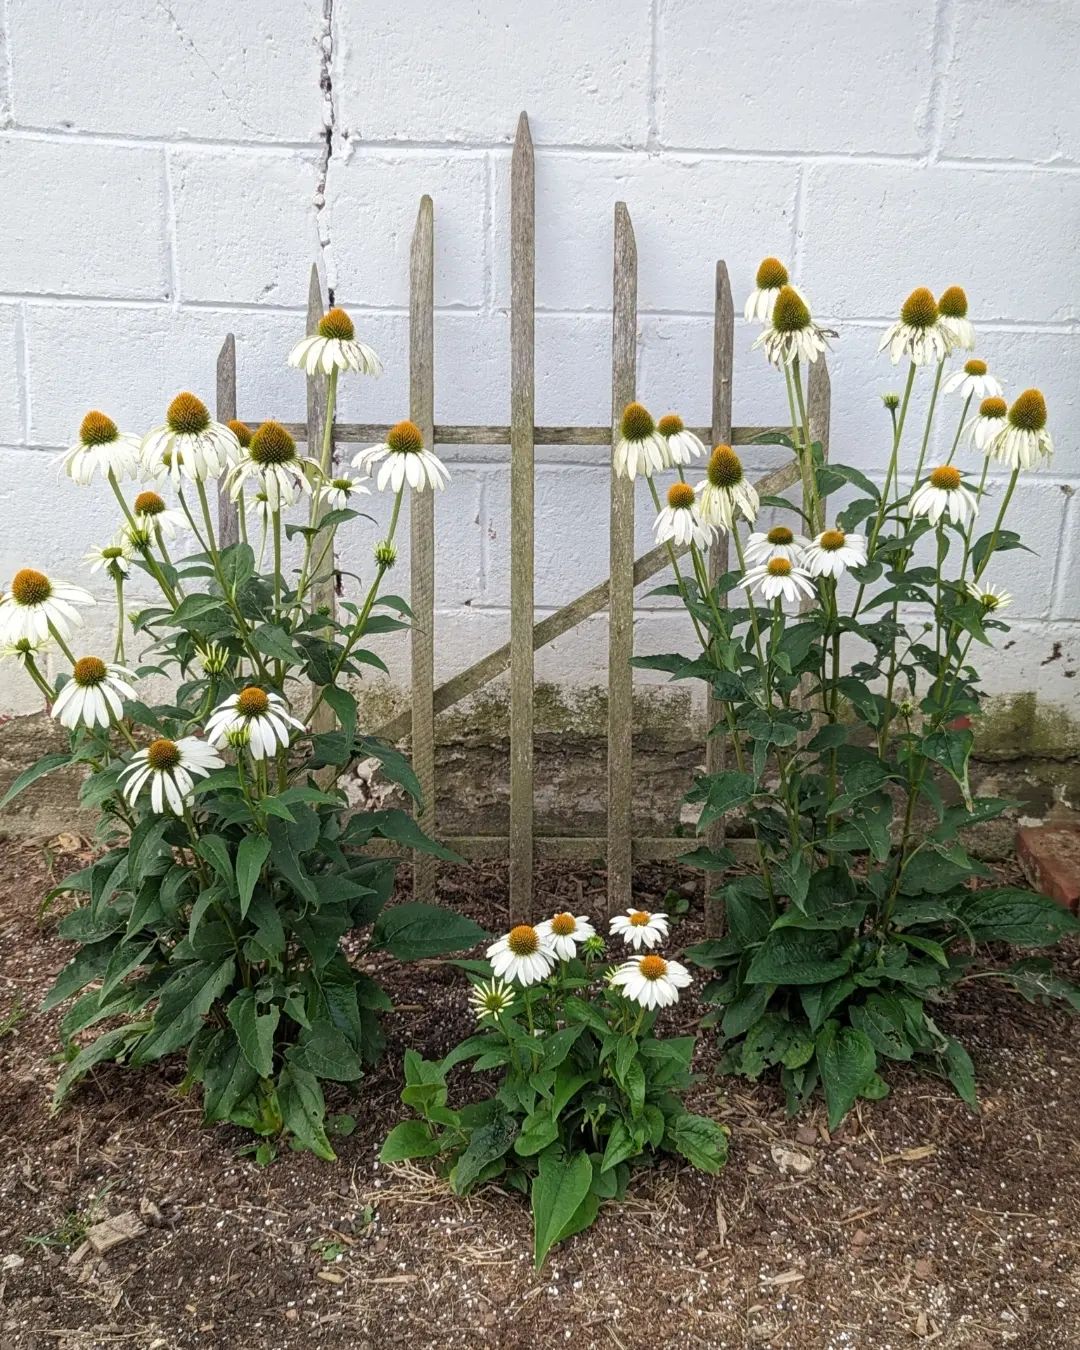 A lovely arrangement of white Coneflowers gracing a fence, adding elegance and natural beauty to the surroundings.